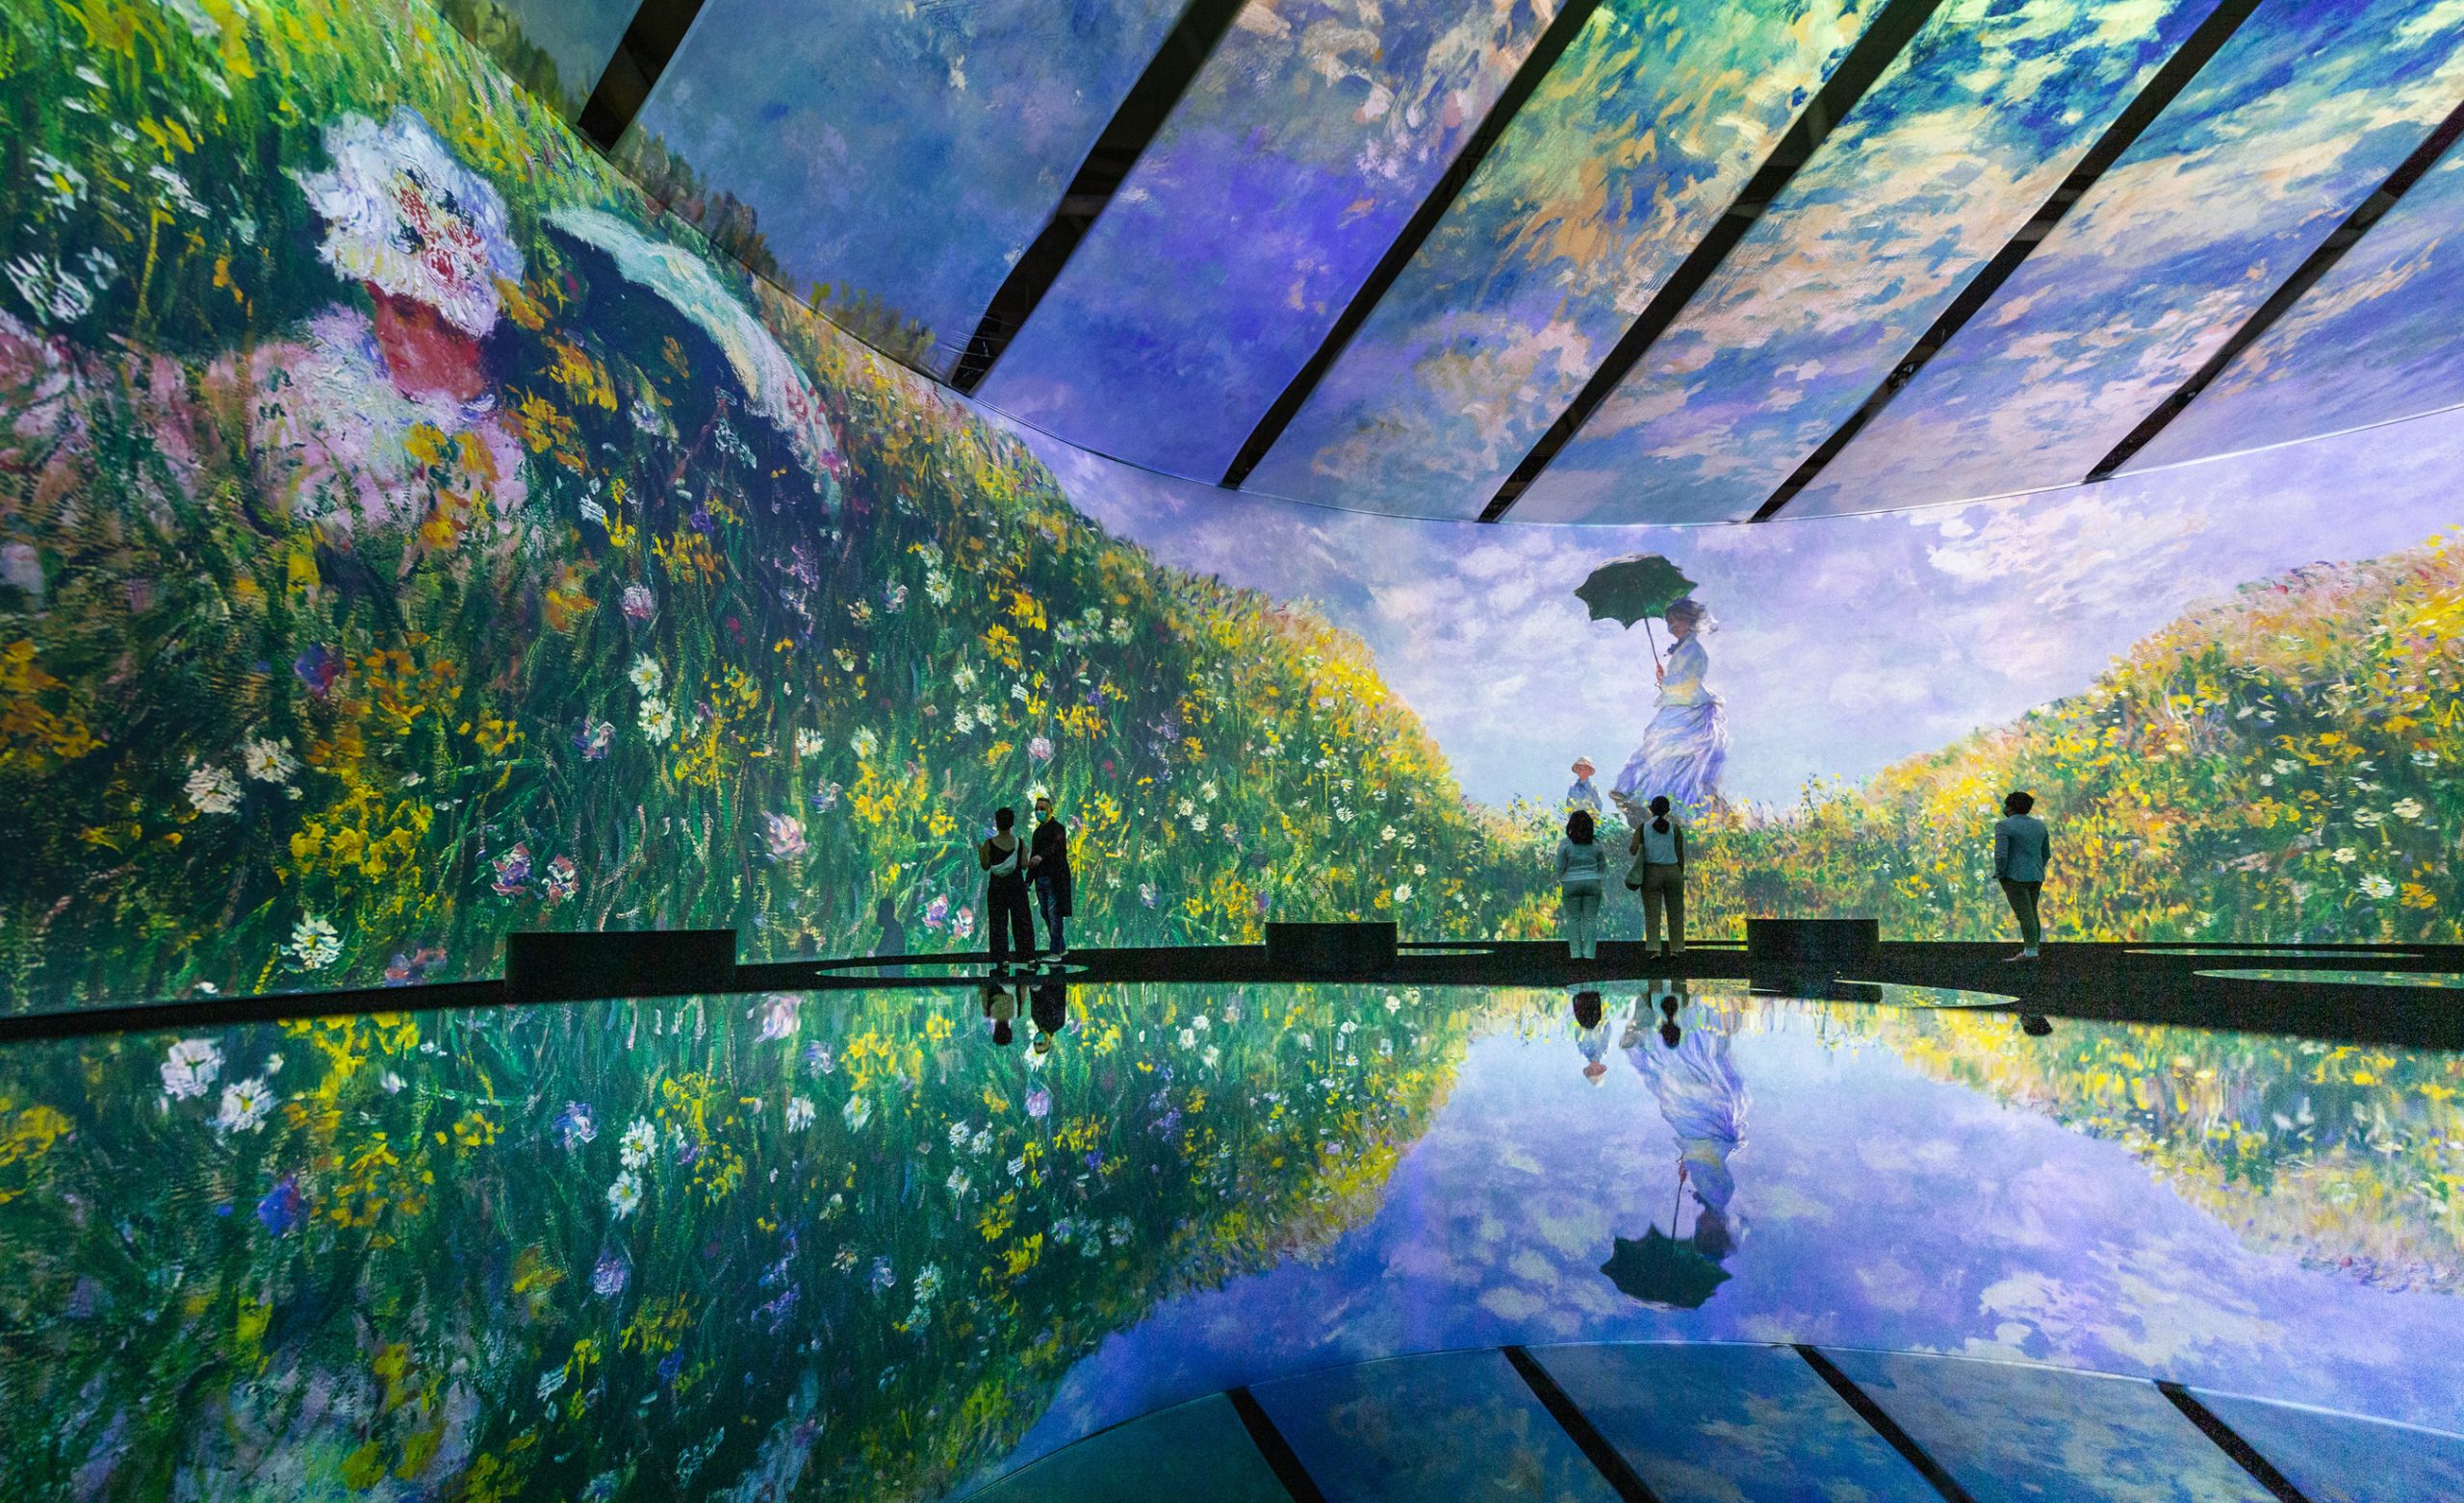 Tired of the already immersive Van Gogh experience?  Three separate companies launch immersive competitive experiences at Monet